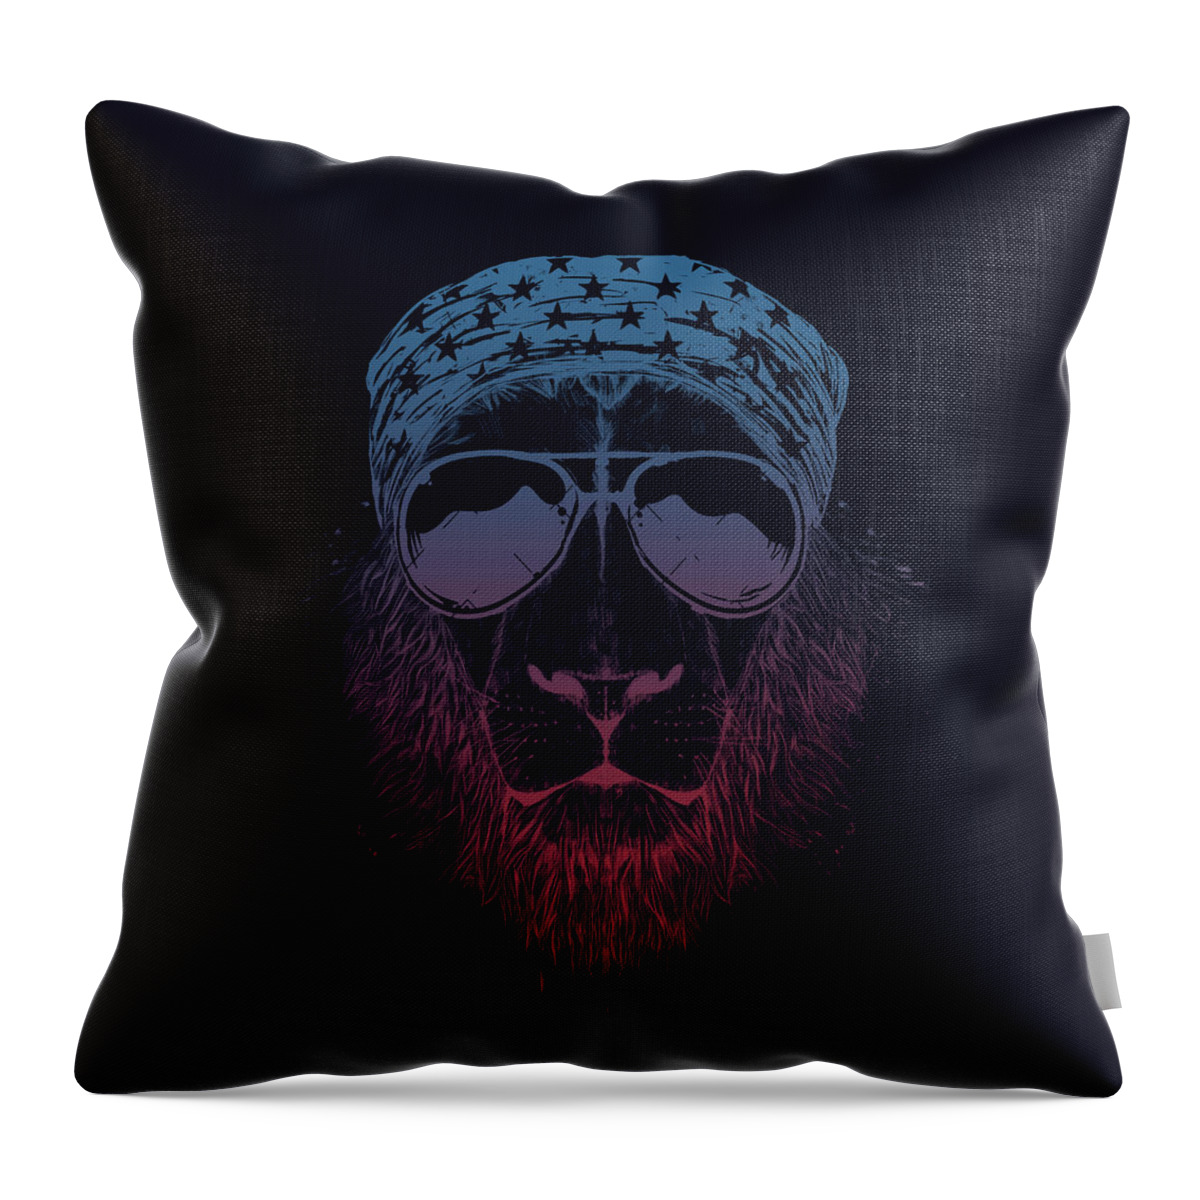 Lion Throw Pillow featuring the drawing Wild lion by Balazs Solti